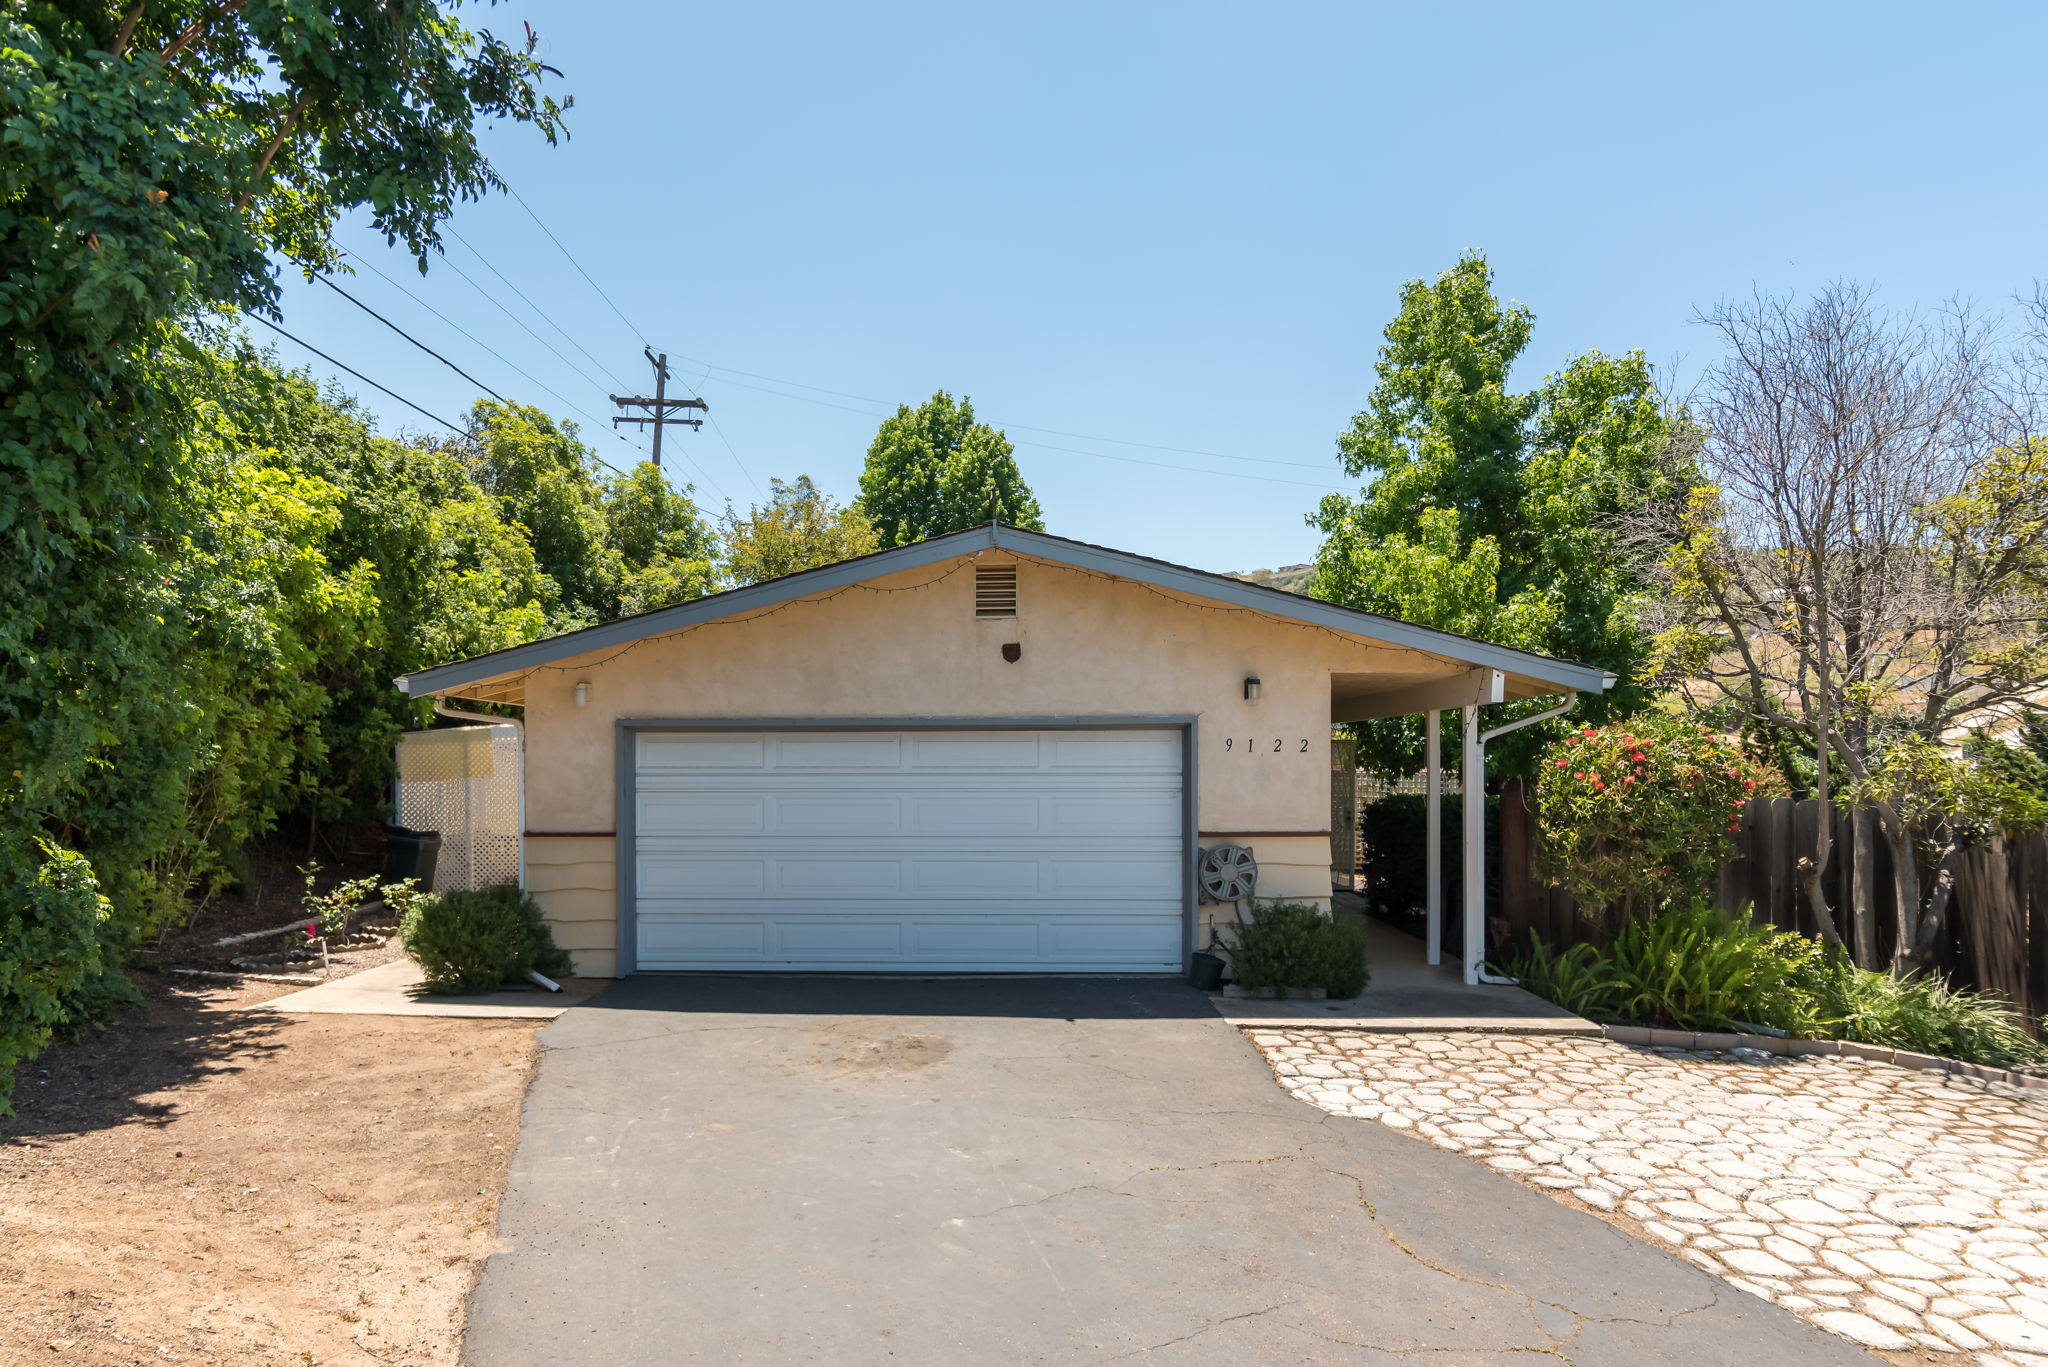  9122 Westhill Rd, Lakeside, CA 92040, US Photo 25